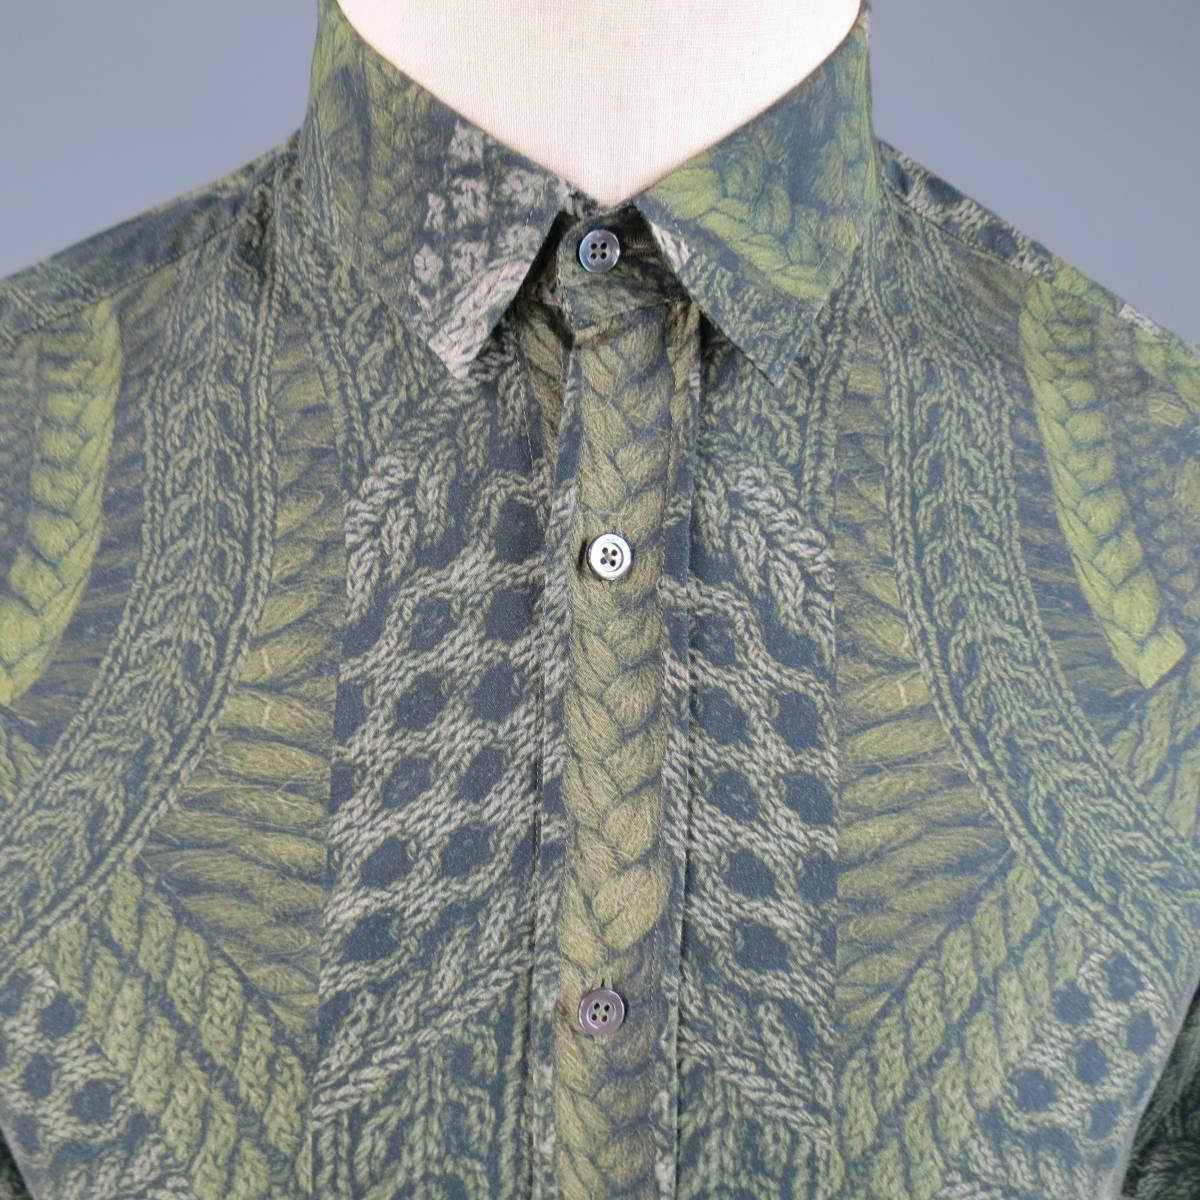 Chic MCQ by ALEXANDER MCQUEEN pointed collar, button up dress shirt comes in a light weight cotton with all over symmetrical braided ropes print in shades of green with Mcq logo embroidered on back.
 
Excellent Pre-Owned Condition.
No size tag.